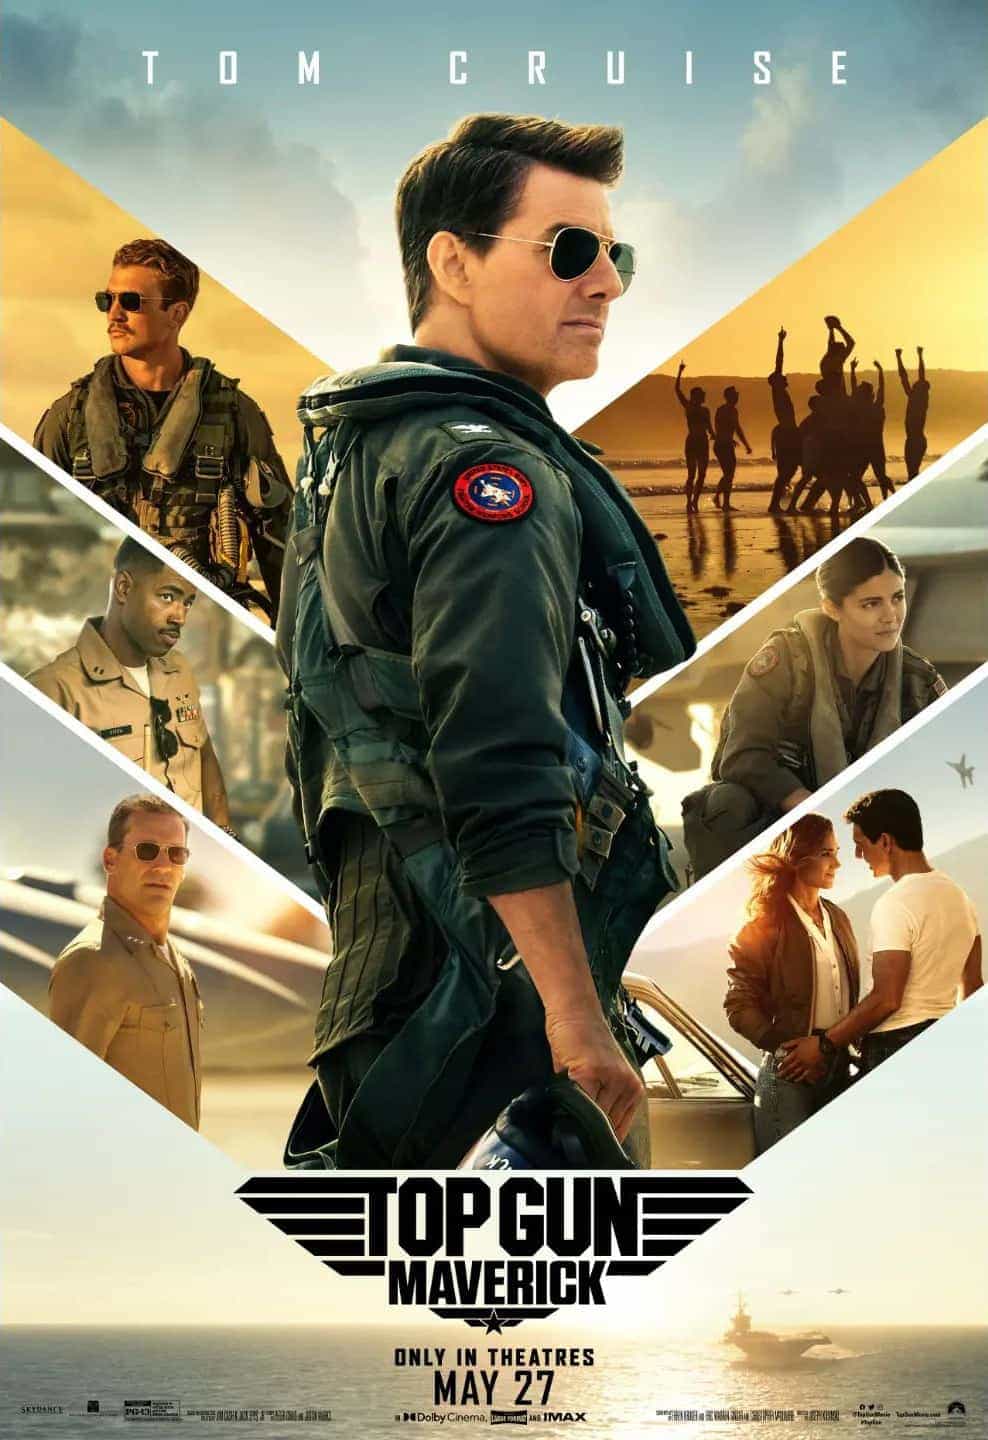 New trailer and poster released for Top Gun: Maverick starring Tom Cruise - movie UK release date 27th May 2022 #topgunmaverick